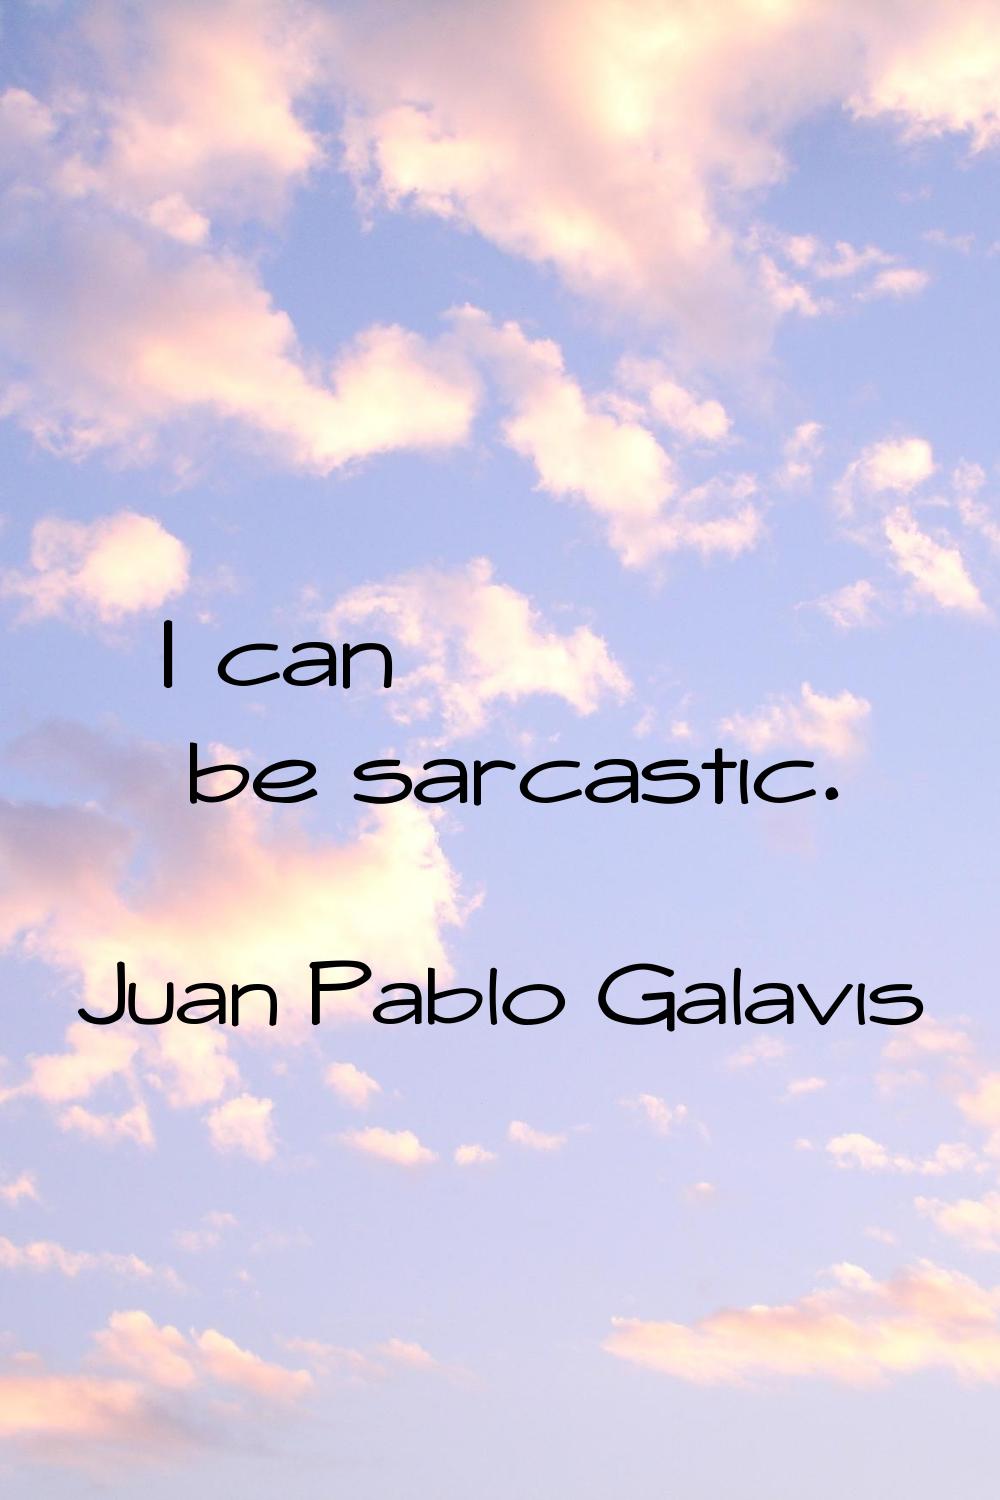 I can be sarcastic.